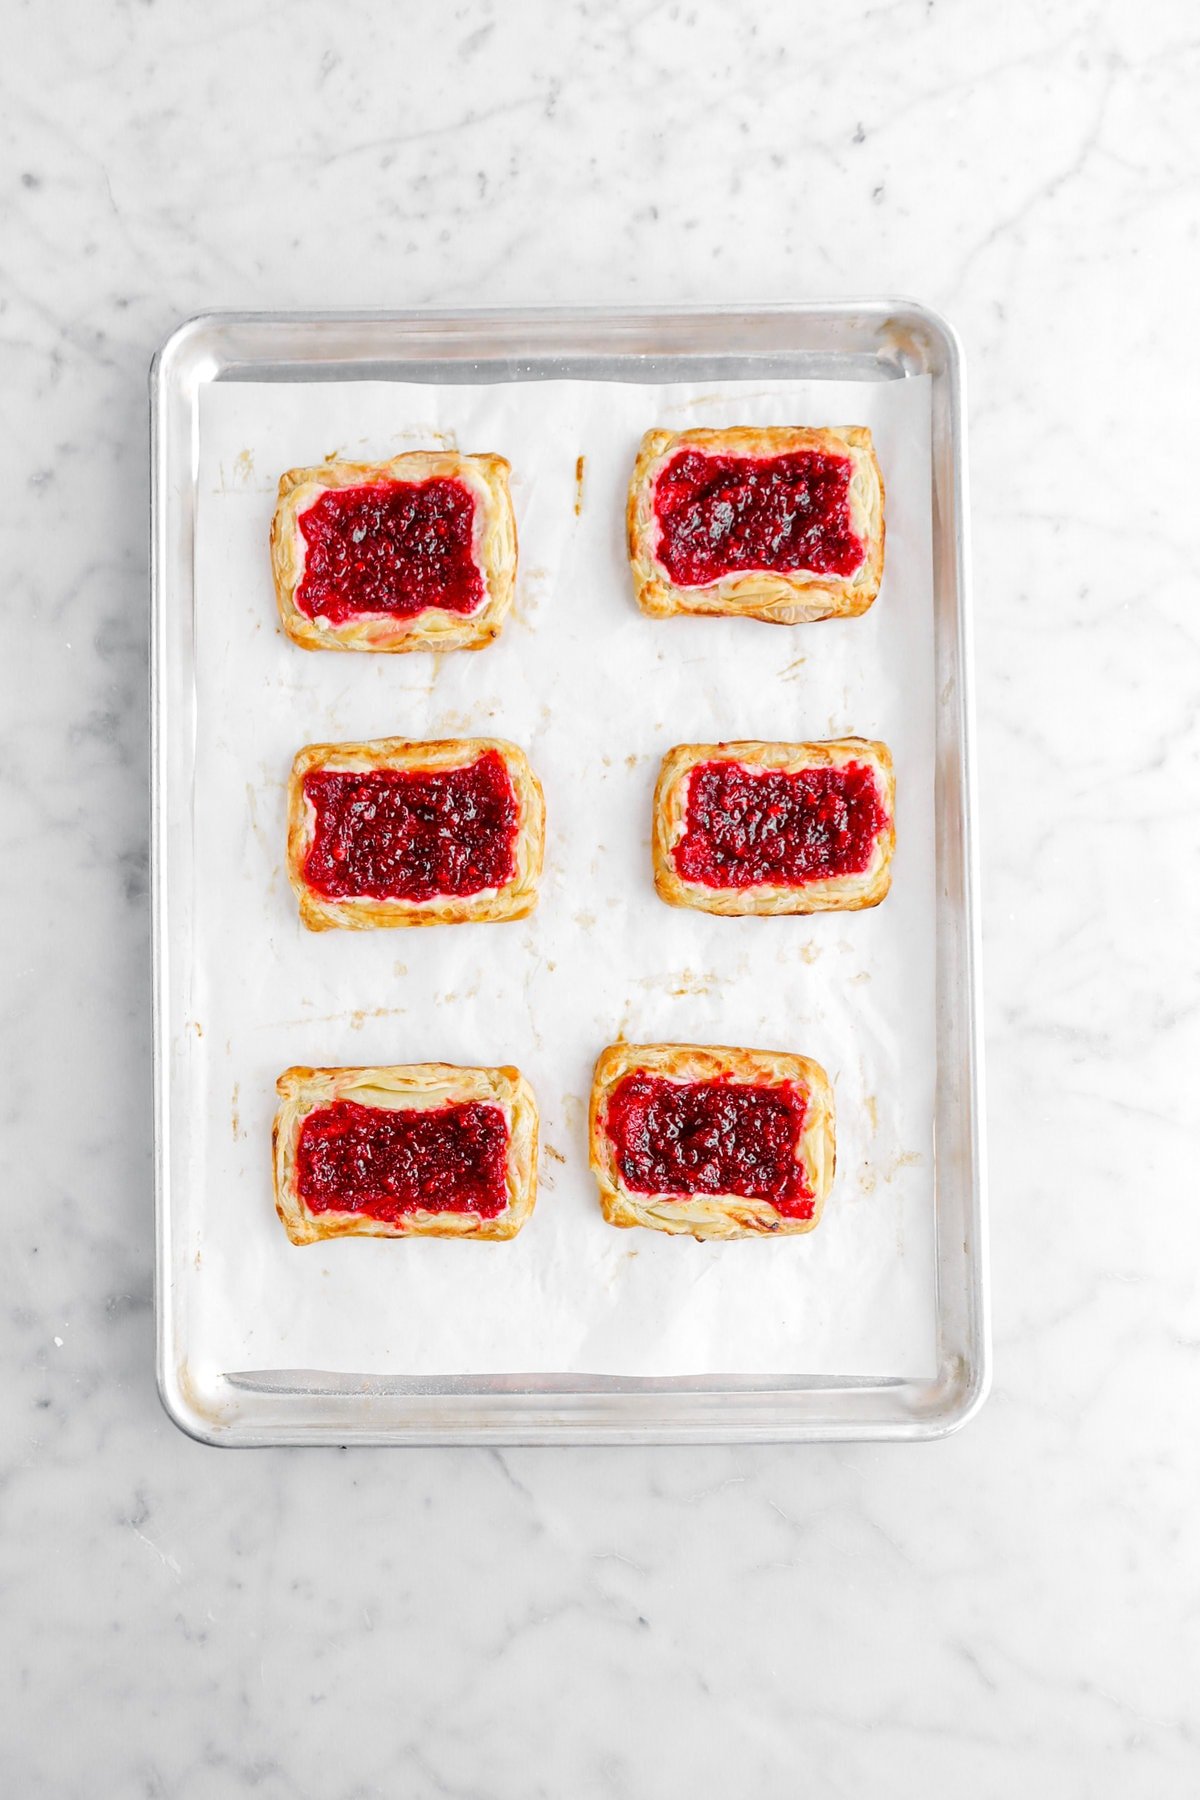 six baked puff pastry tarts on lined sheet pan.